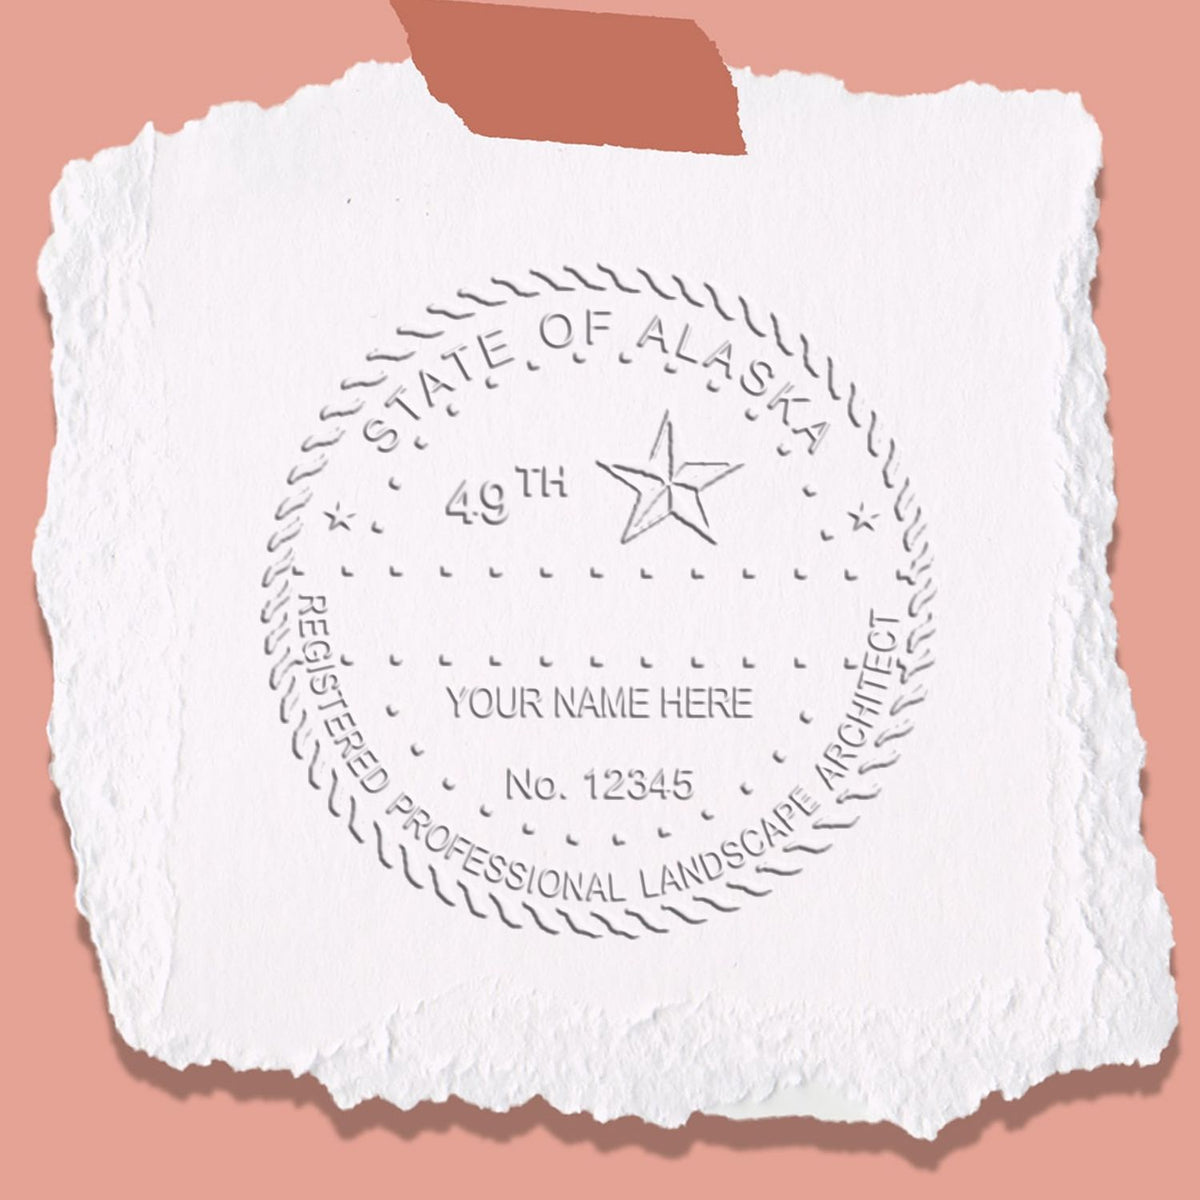 An in use photo of the Hybrid Alaska Landscape Architect Seal showing a sample imprint on a cardstock